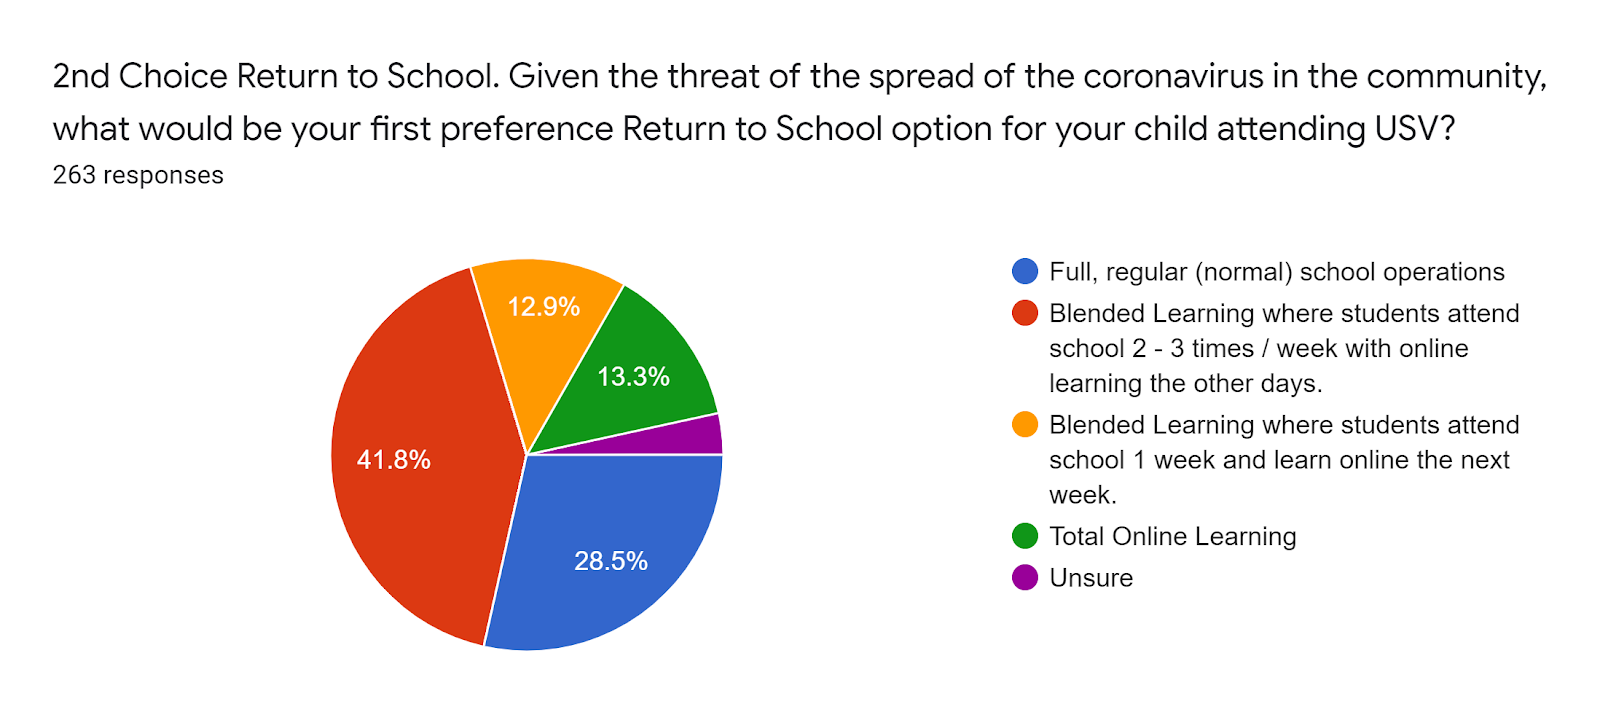 Forms response chart. Question title: 2nd Choice Return to School. Given the threat of the spread of the coronavirus in the community, what would be your first preference Return to School option for your child attending USV?. Number of responses: 263 responses.